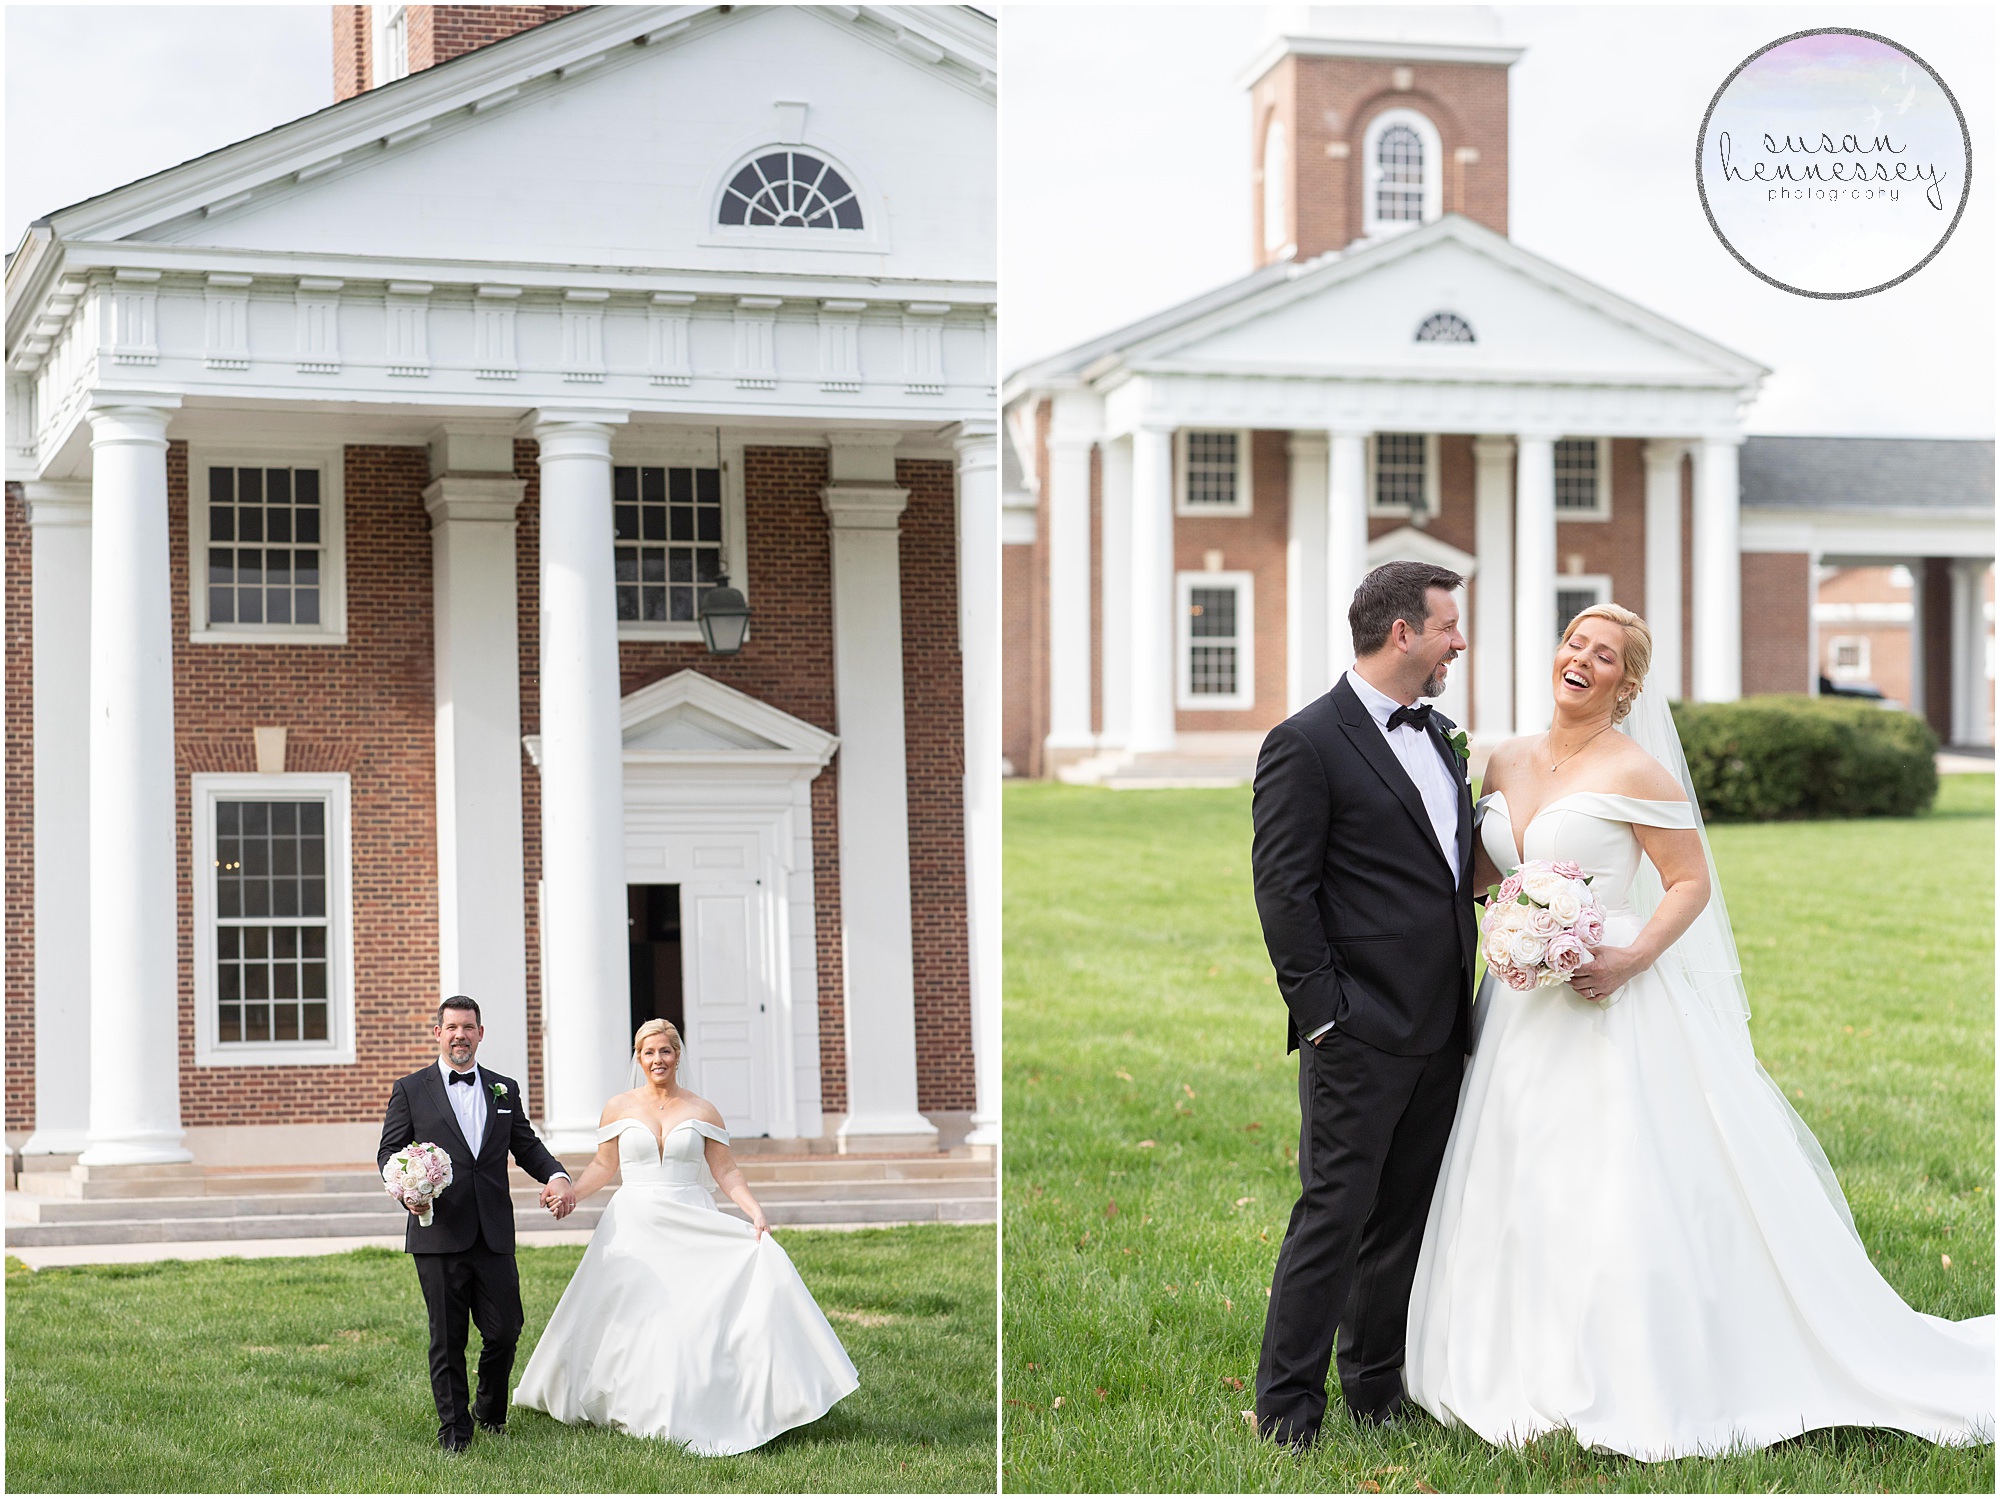 Planning a Micro Wedding? The outdoor area of the The First Presbyterian Church of Moorestown is beautiful for portraits.